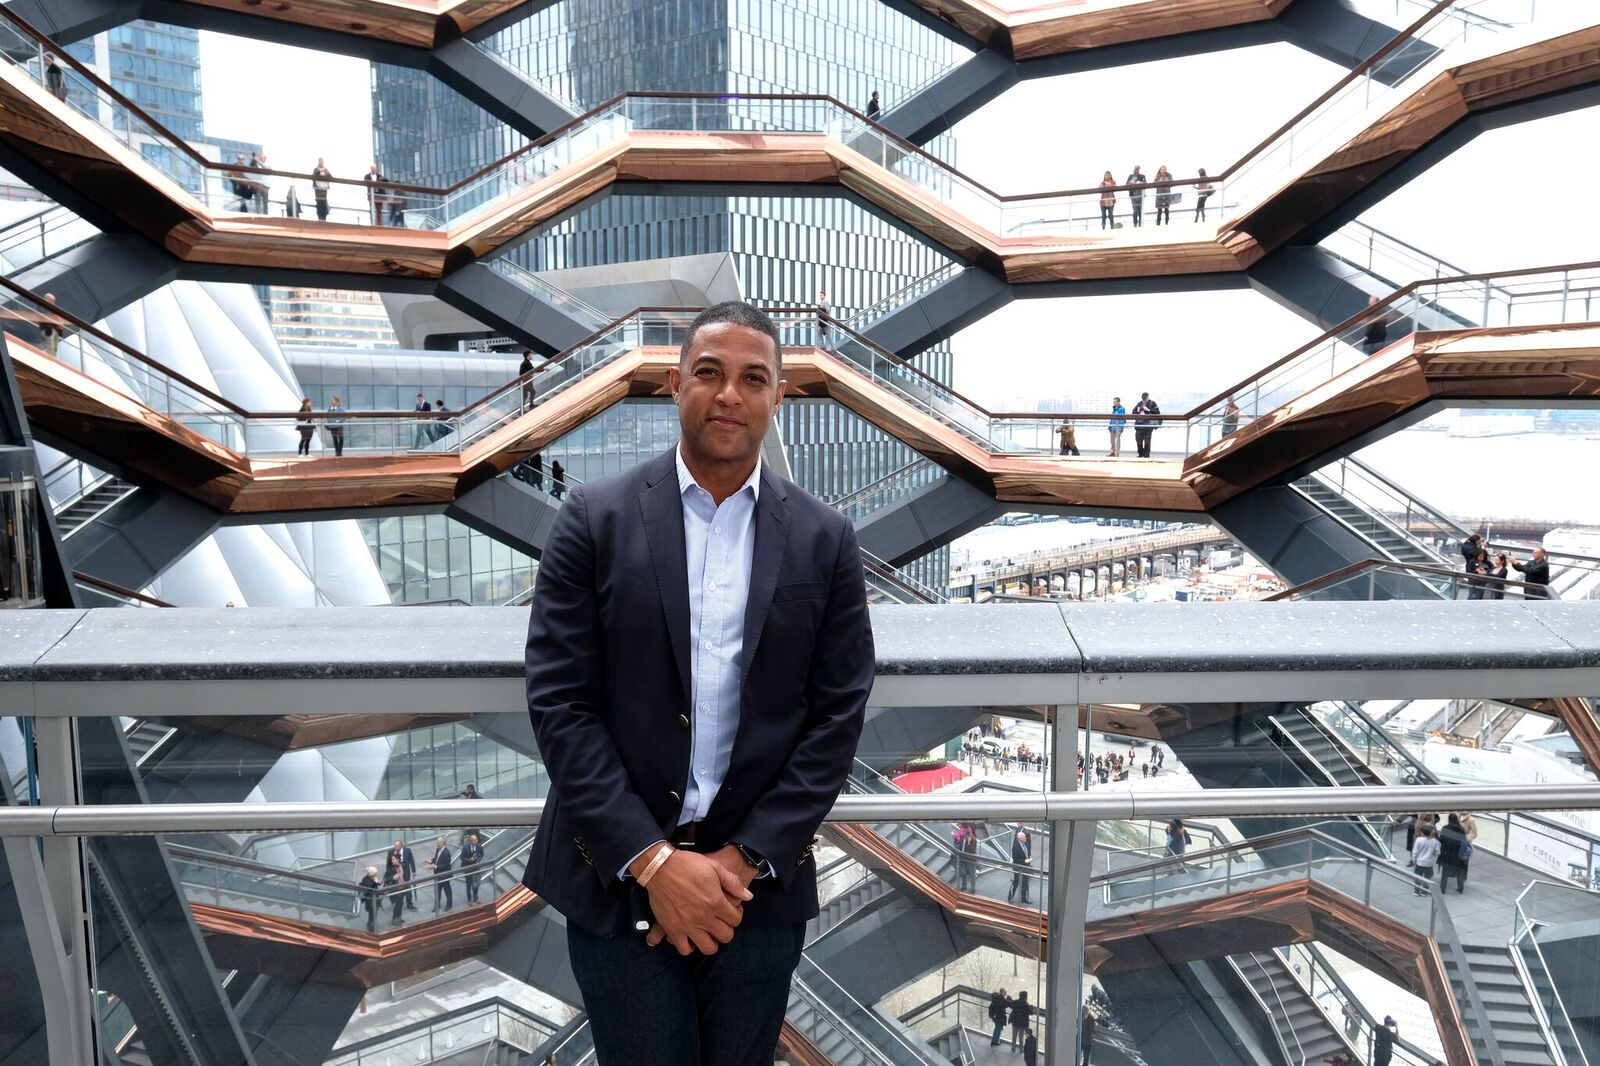 Don Lemon attends Hudson Yards, New York's Newest Neighborhood, Official Opening Event on March 15, 2019 | Photo: Getty Images